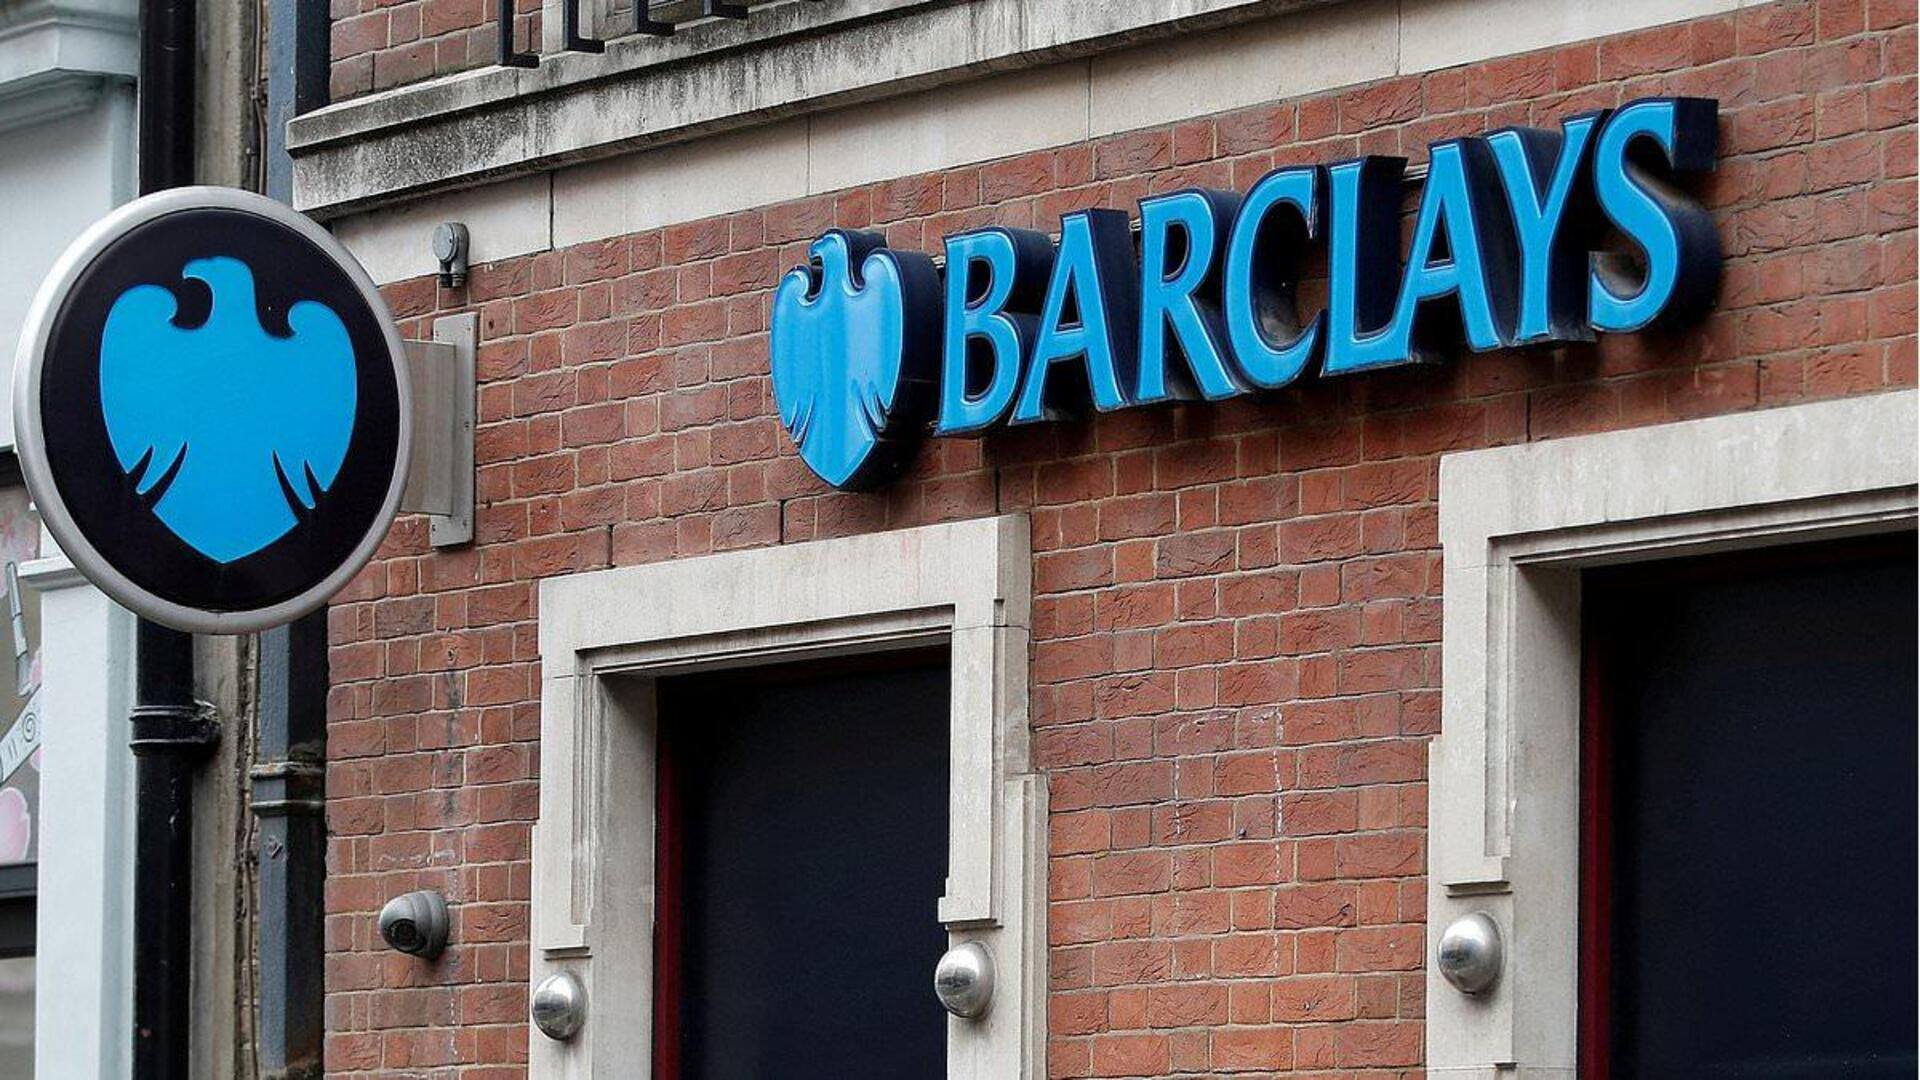 Barclays to axe 2,000 jobs in £1bn cost cut plan